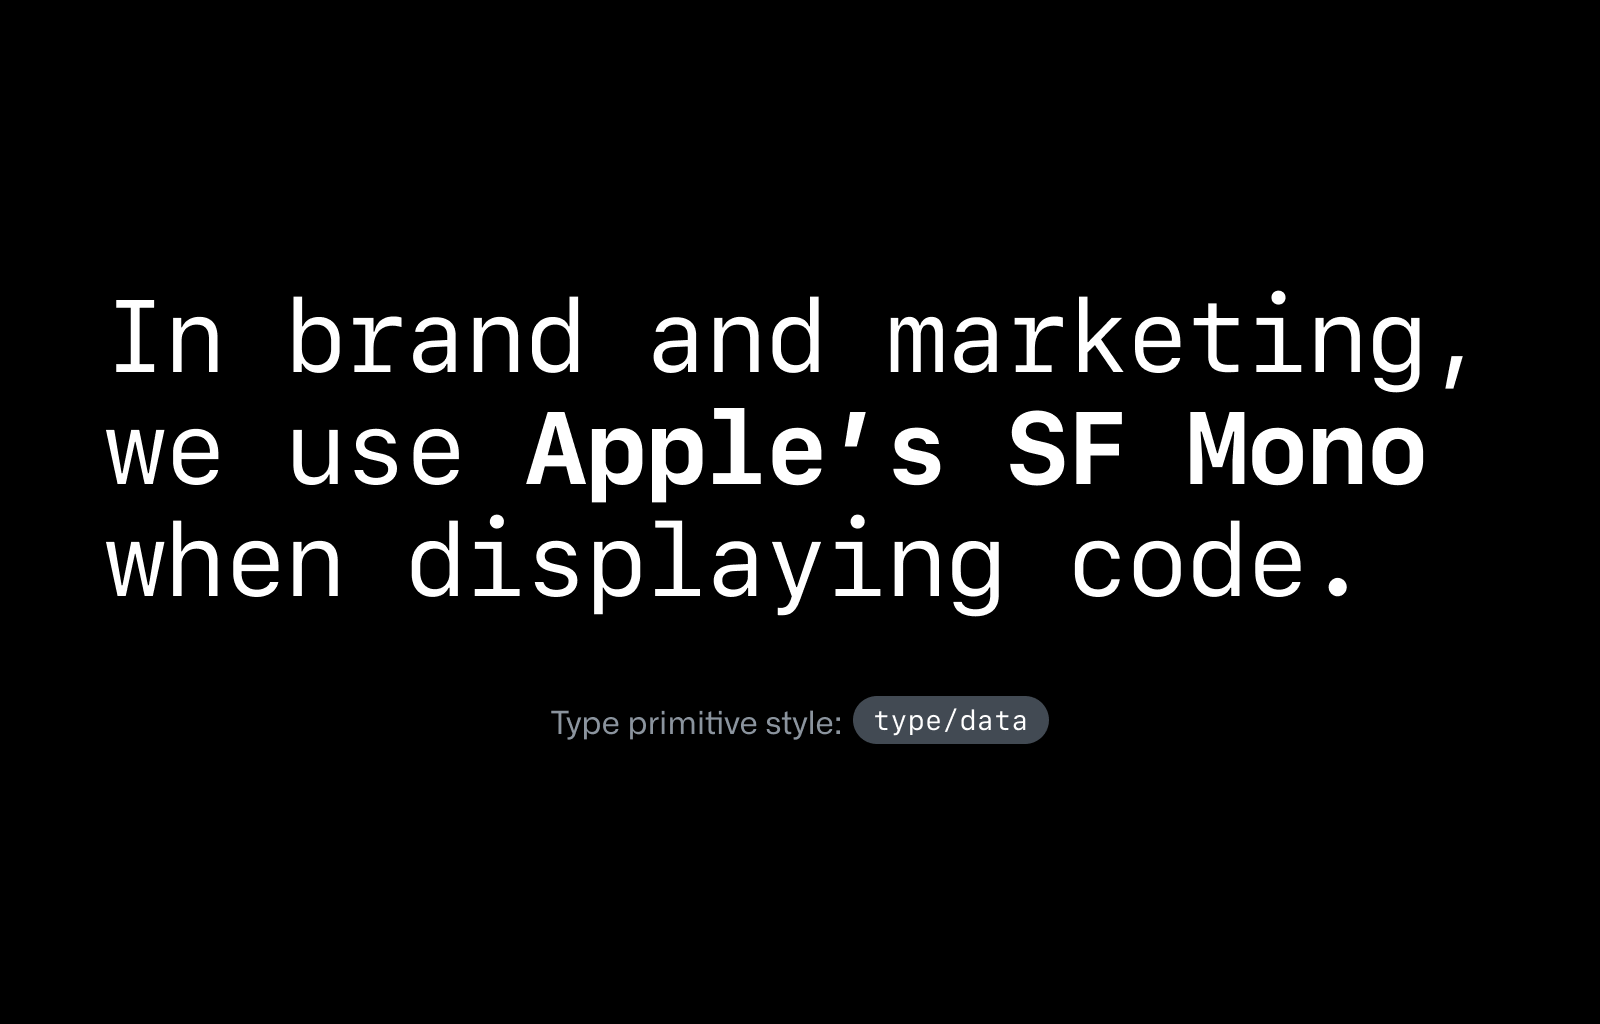 In brand and marketing, we use Apple’s SF Mono when displaying code.